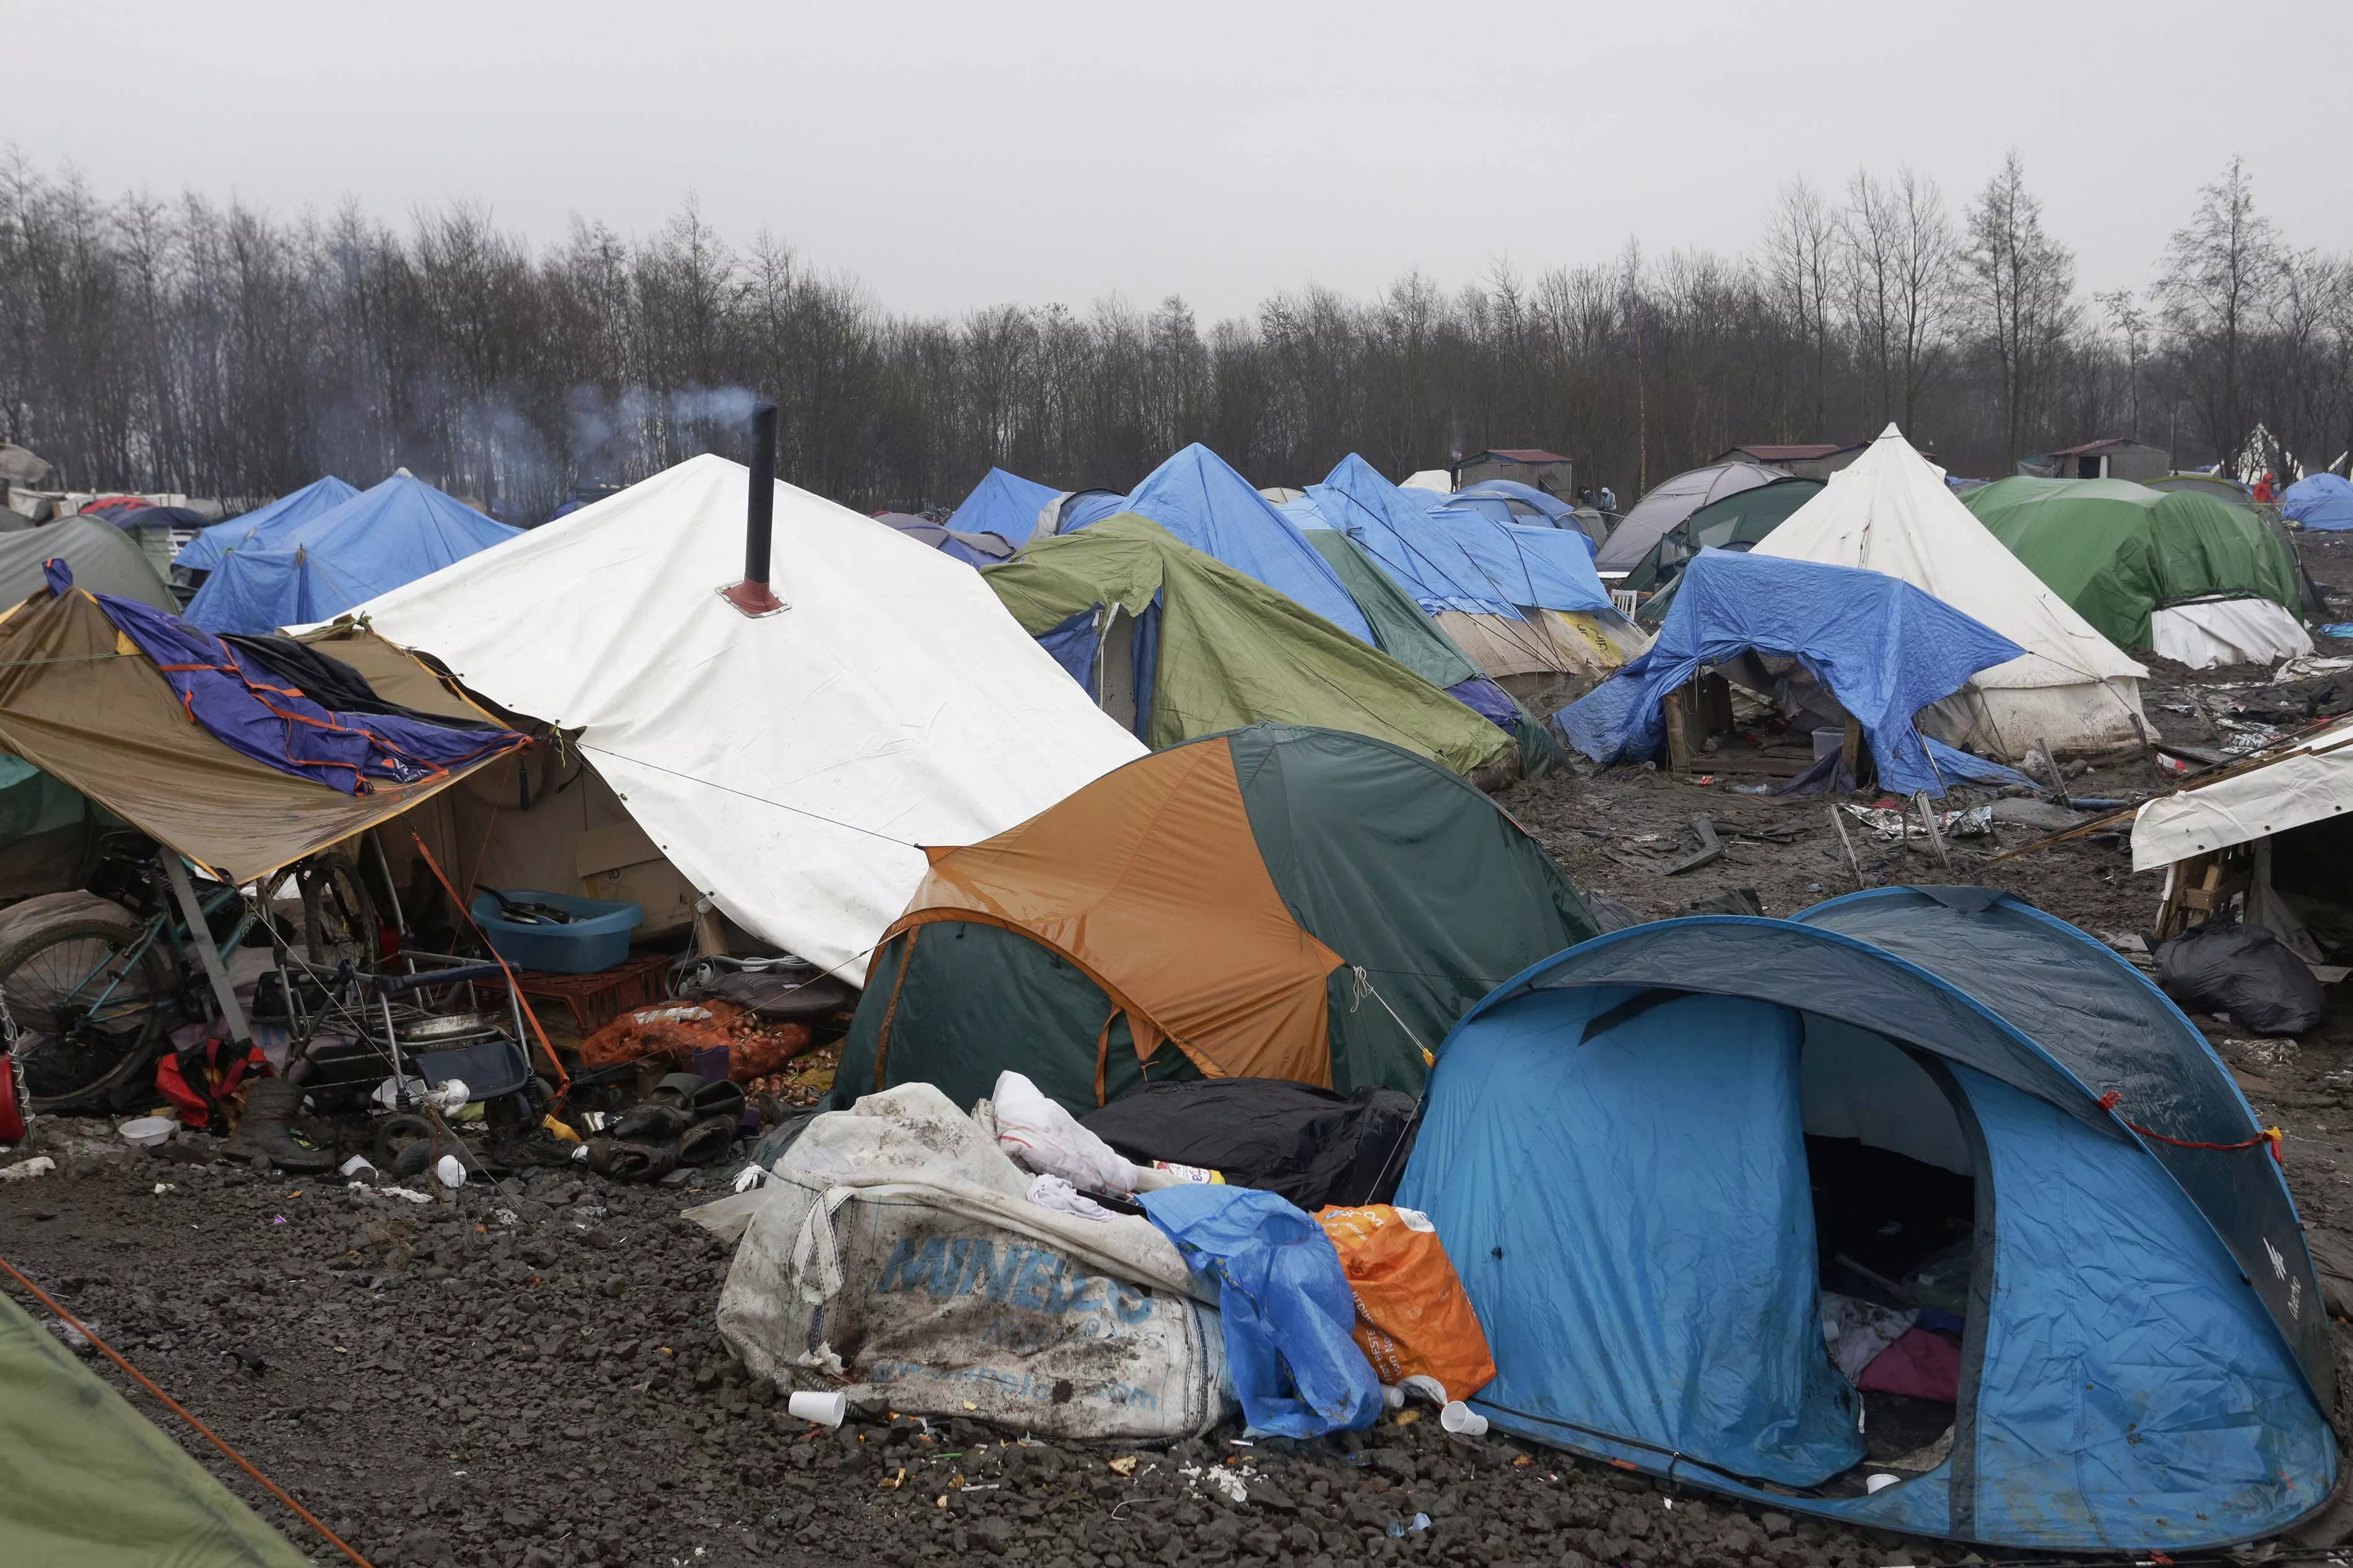 Tents and debris litter the site of a the refugee camp in Grande Synthe near Dunkirk in northern France. Some 2,500 refugees have settled here whilst they attempt to cross to the United Kingdom to seek asylum. Grande Synthe, Dunkirk: A Gill visits the refugee camps of Calais and Grande Synthe in Dunkirk. Photograph by Jon Levy